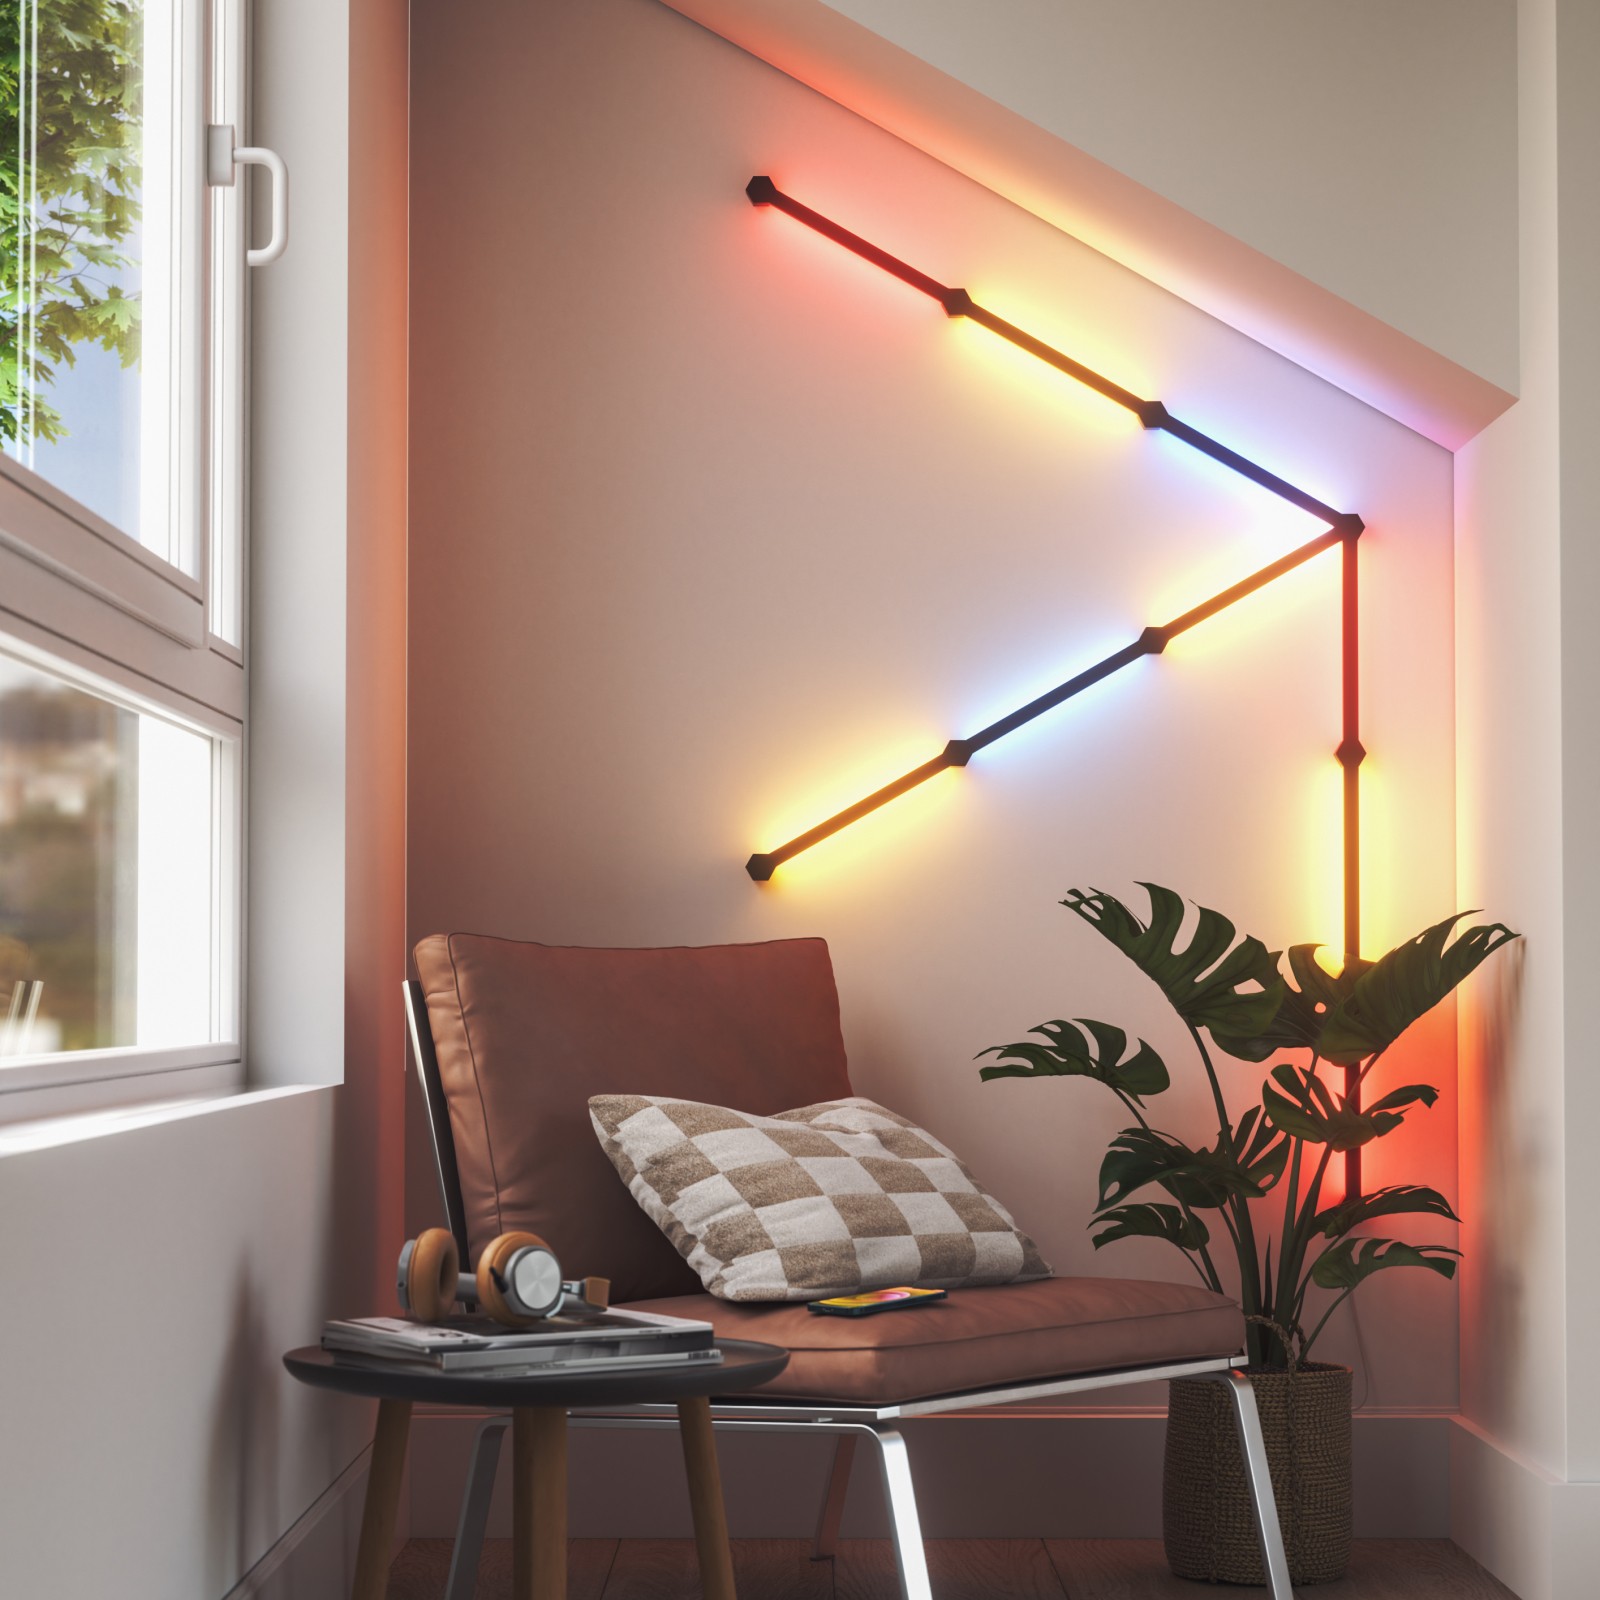 Shop Products | Nanoleaf » States & Consumer United IoT Lighting LED Smart Products »